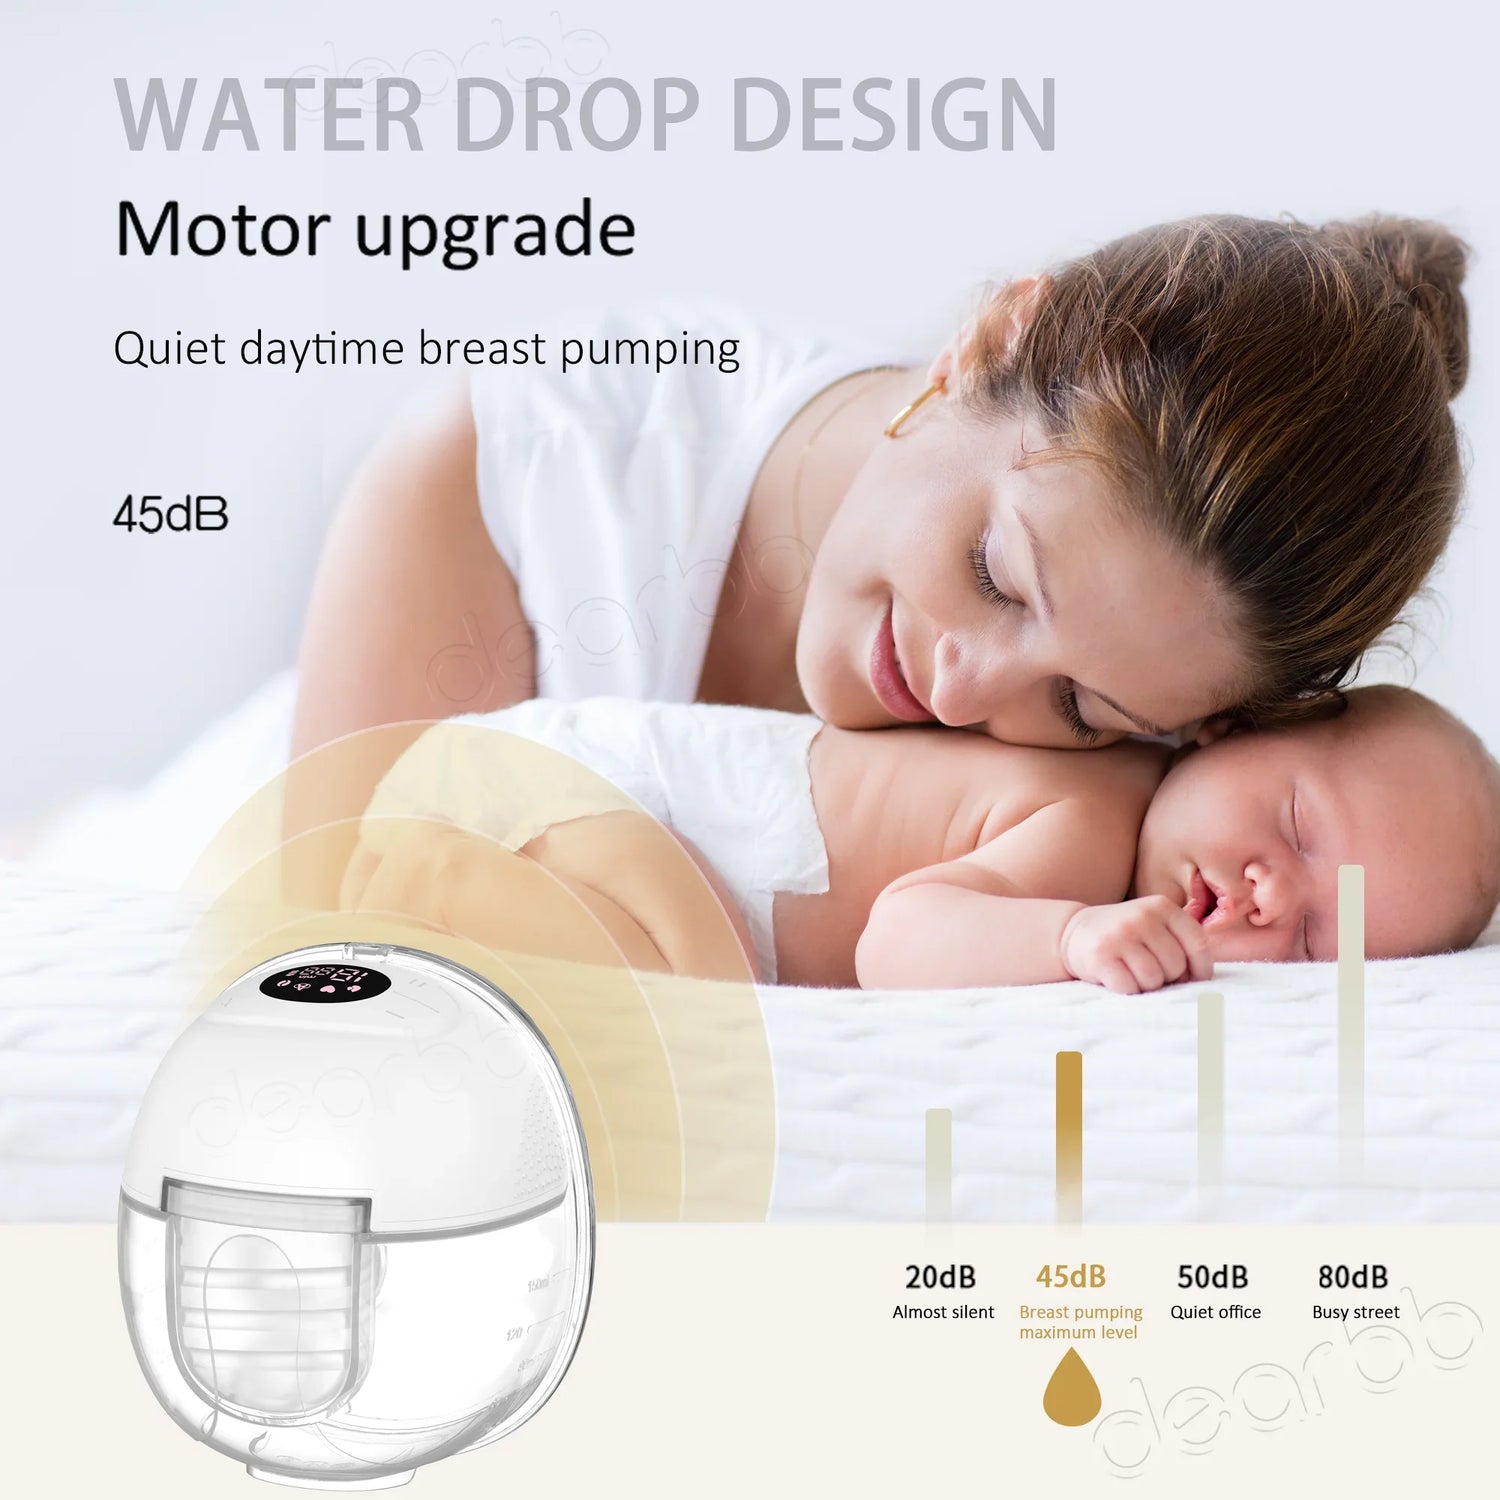 Golden Meadow GM2 - The All **New** Revolutionary Wearable Breast Pump - Double Pump